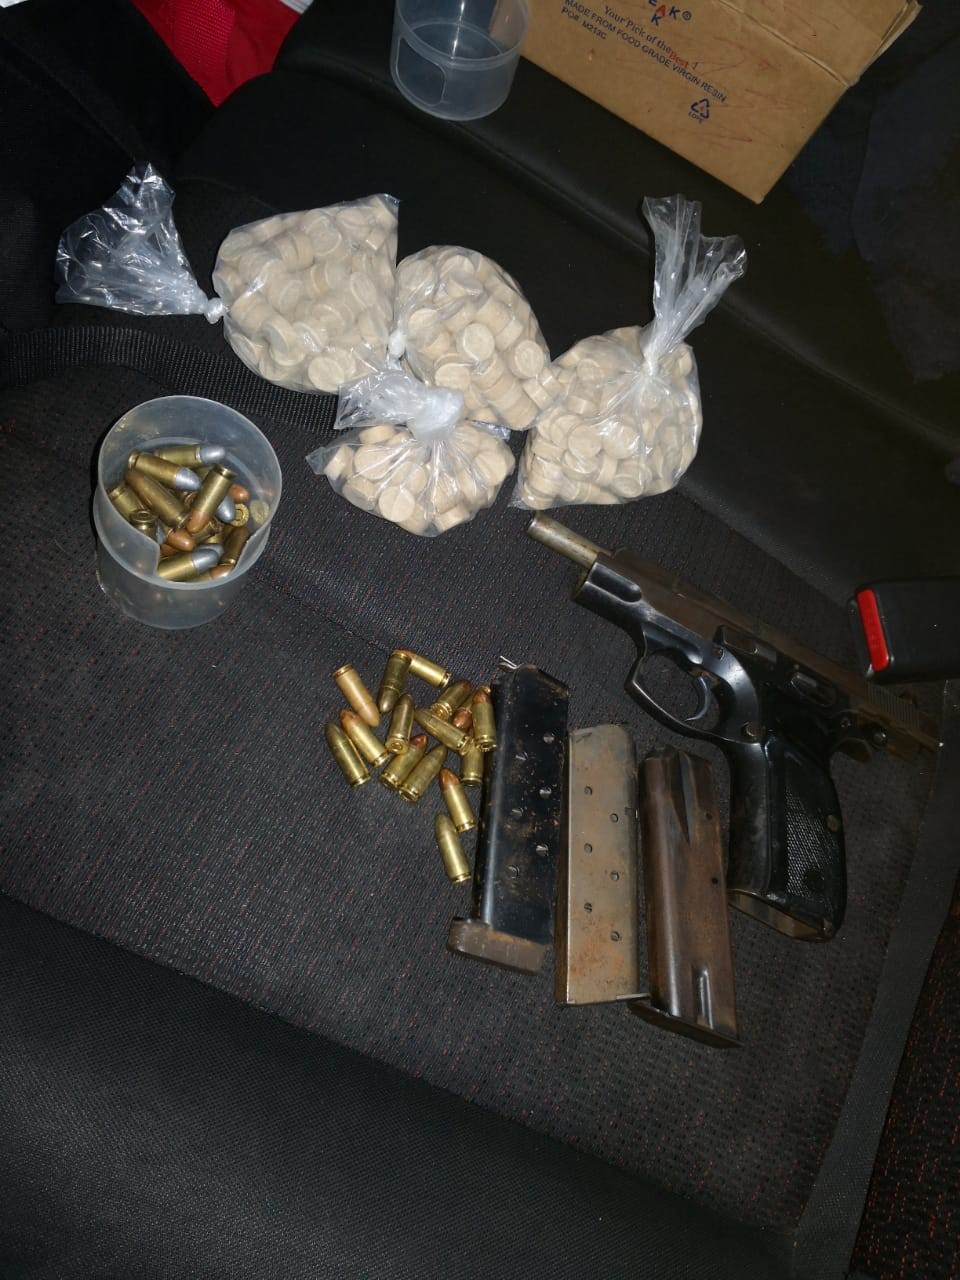 Prohibited firearms, ammunition and drugs seized